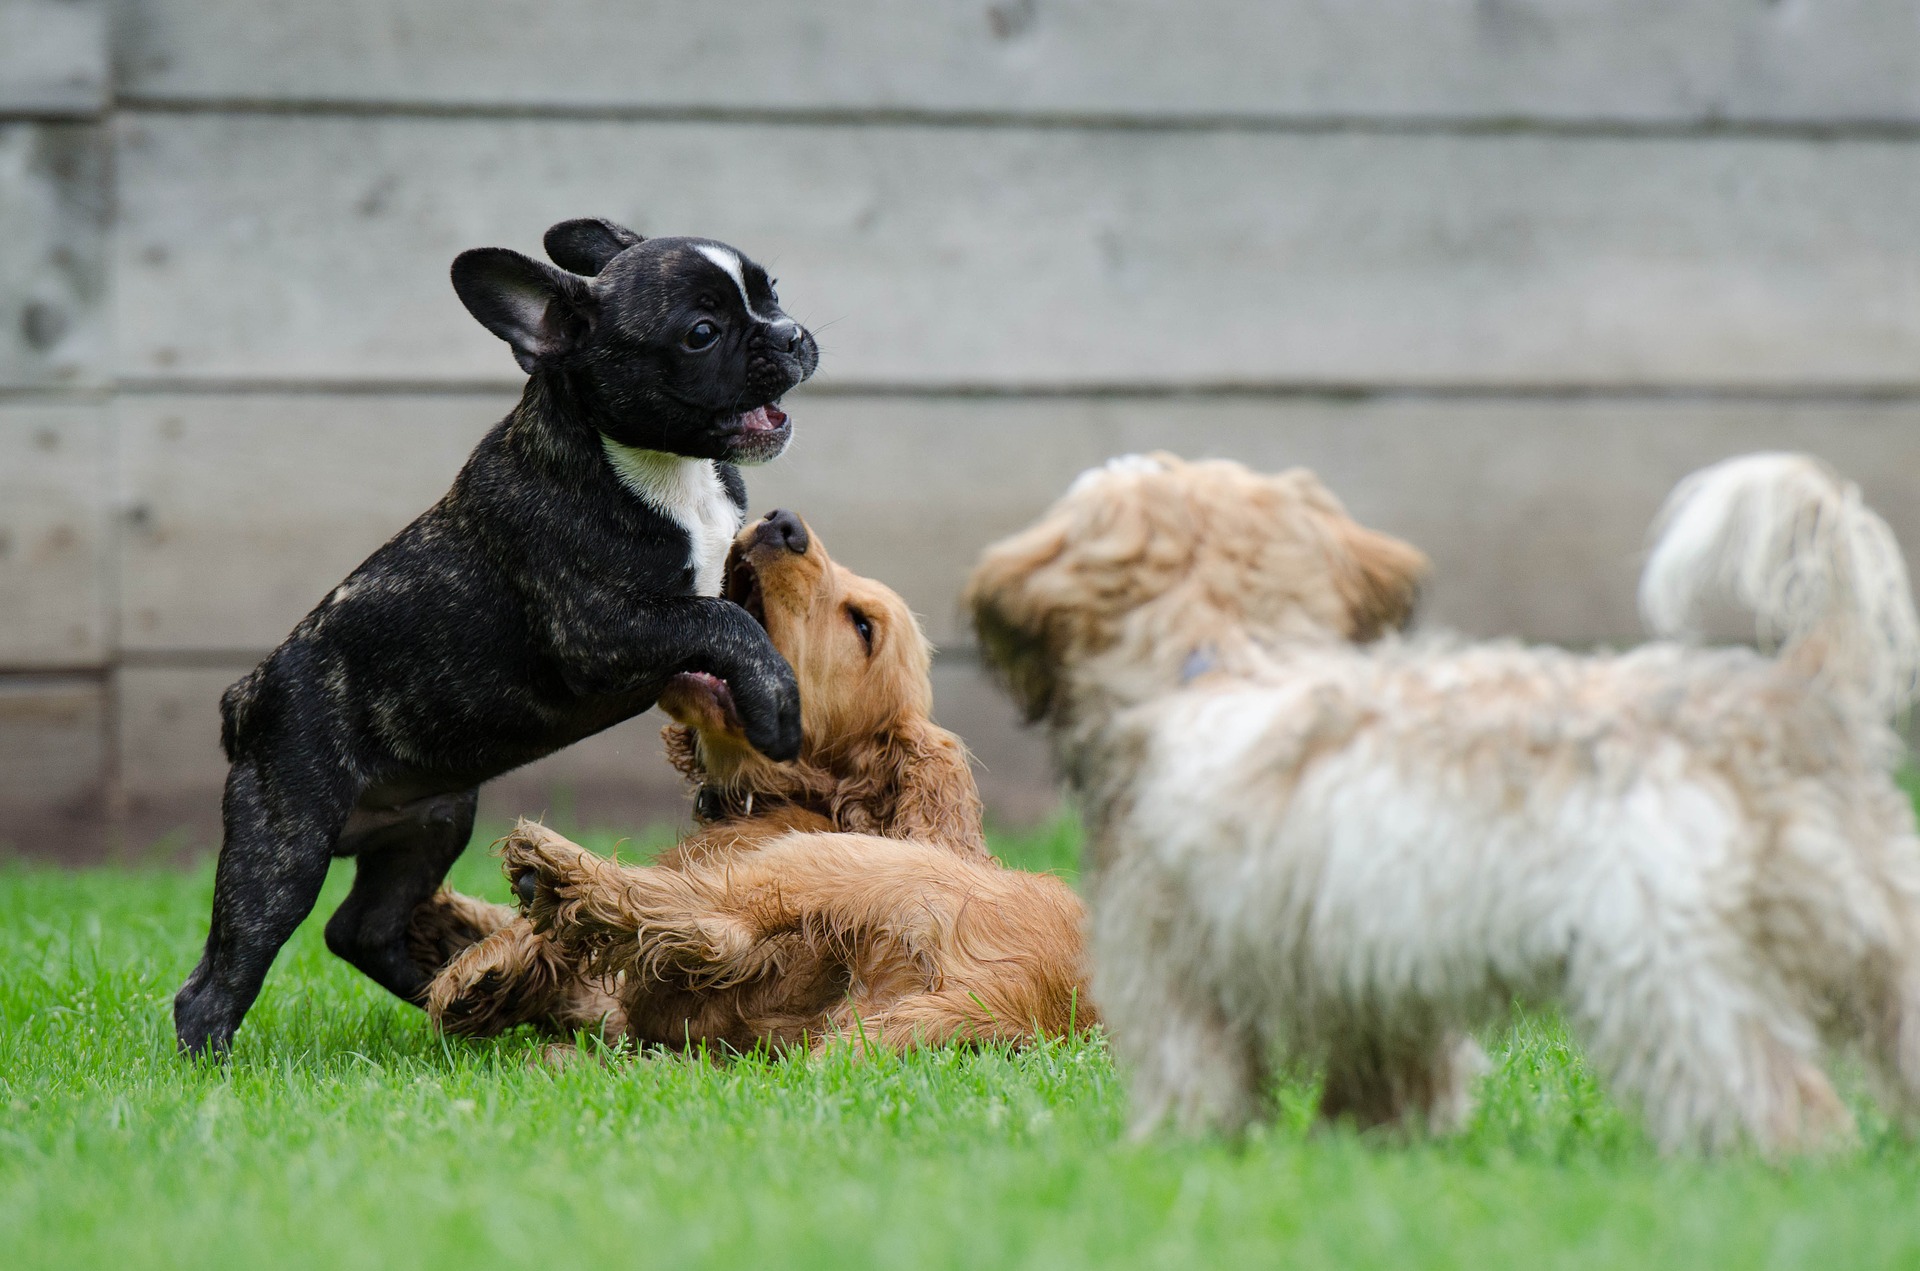 Prevention of kennel cough